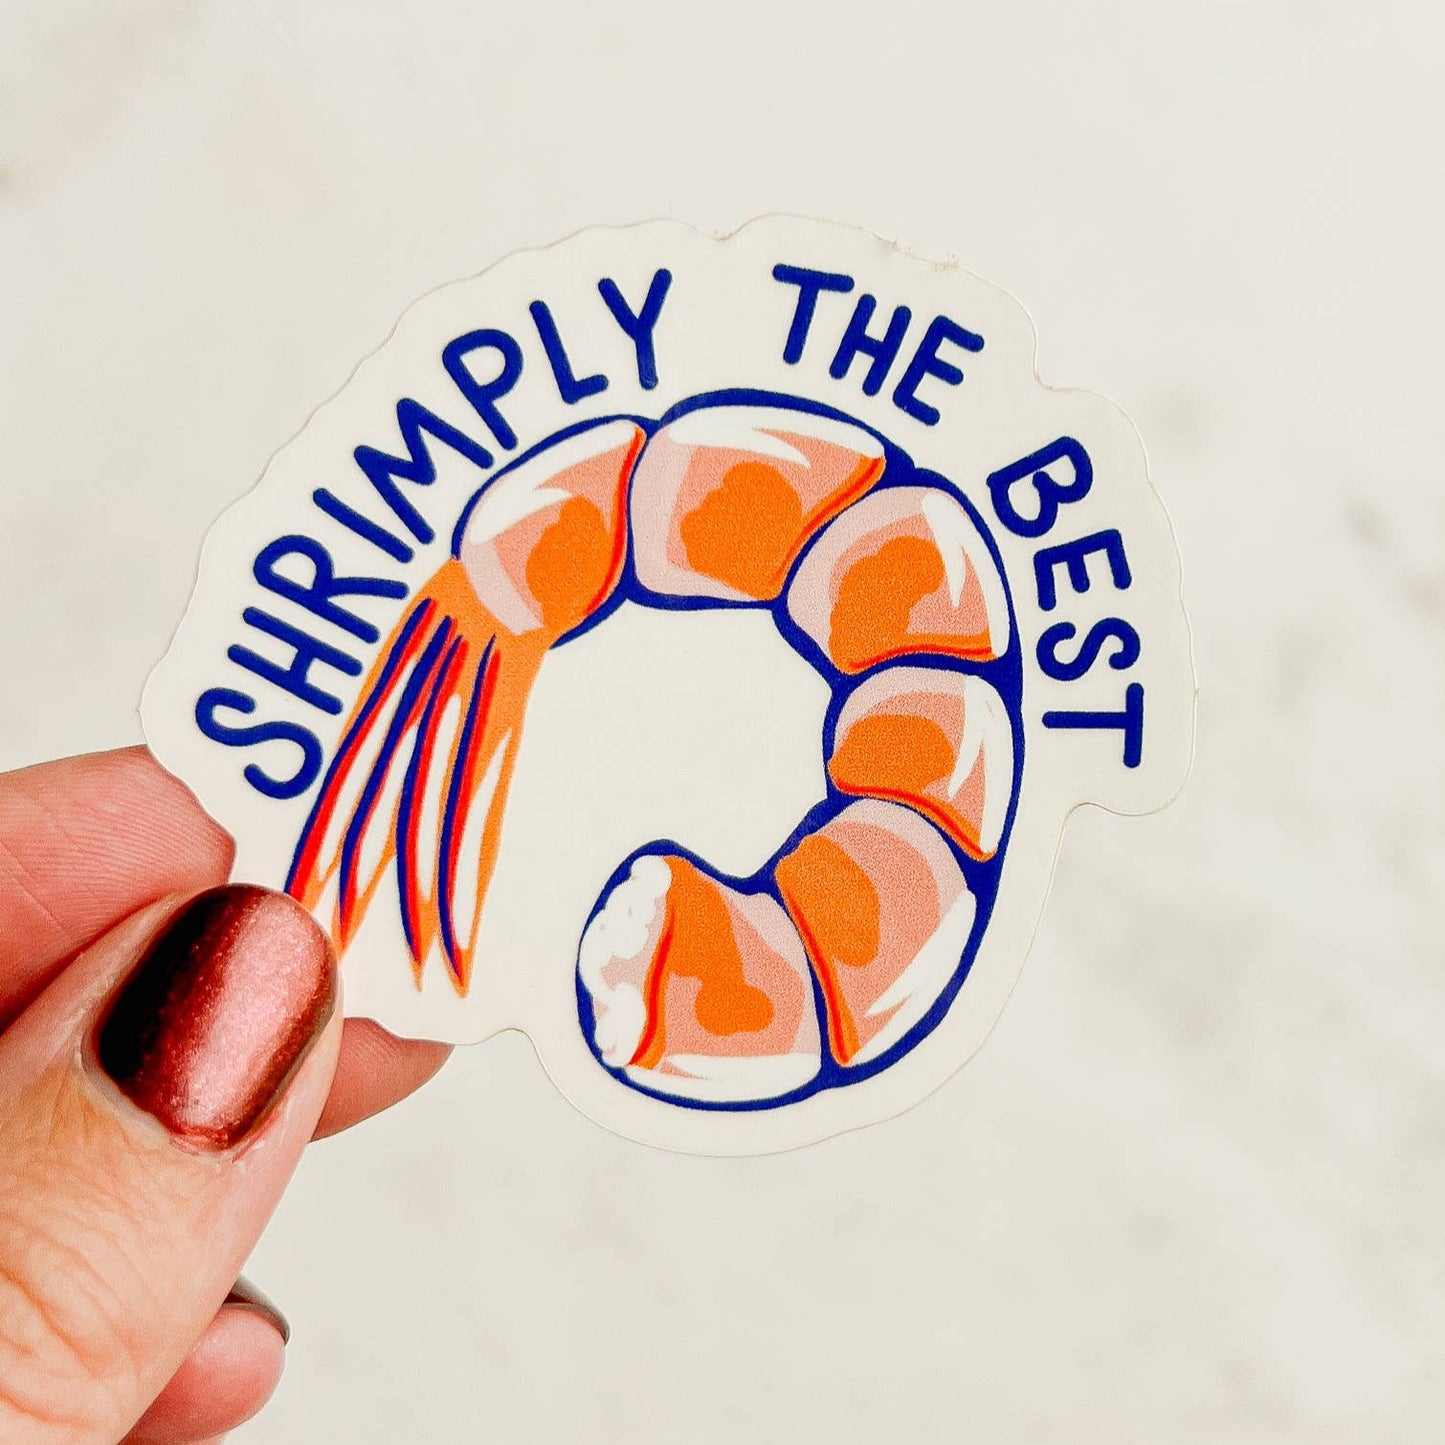 transparent sticker with a piece of shrimp and words that say "Shrimply the Best"